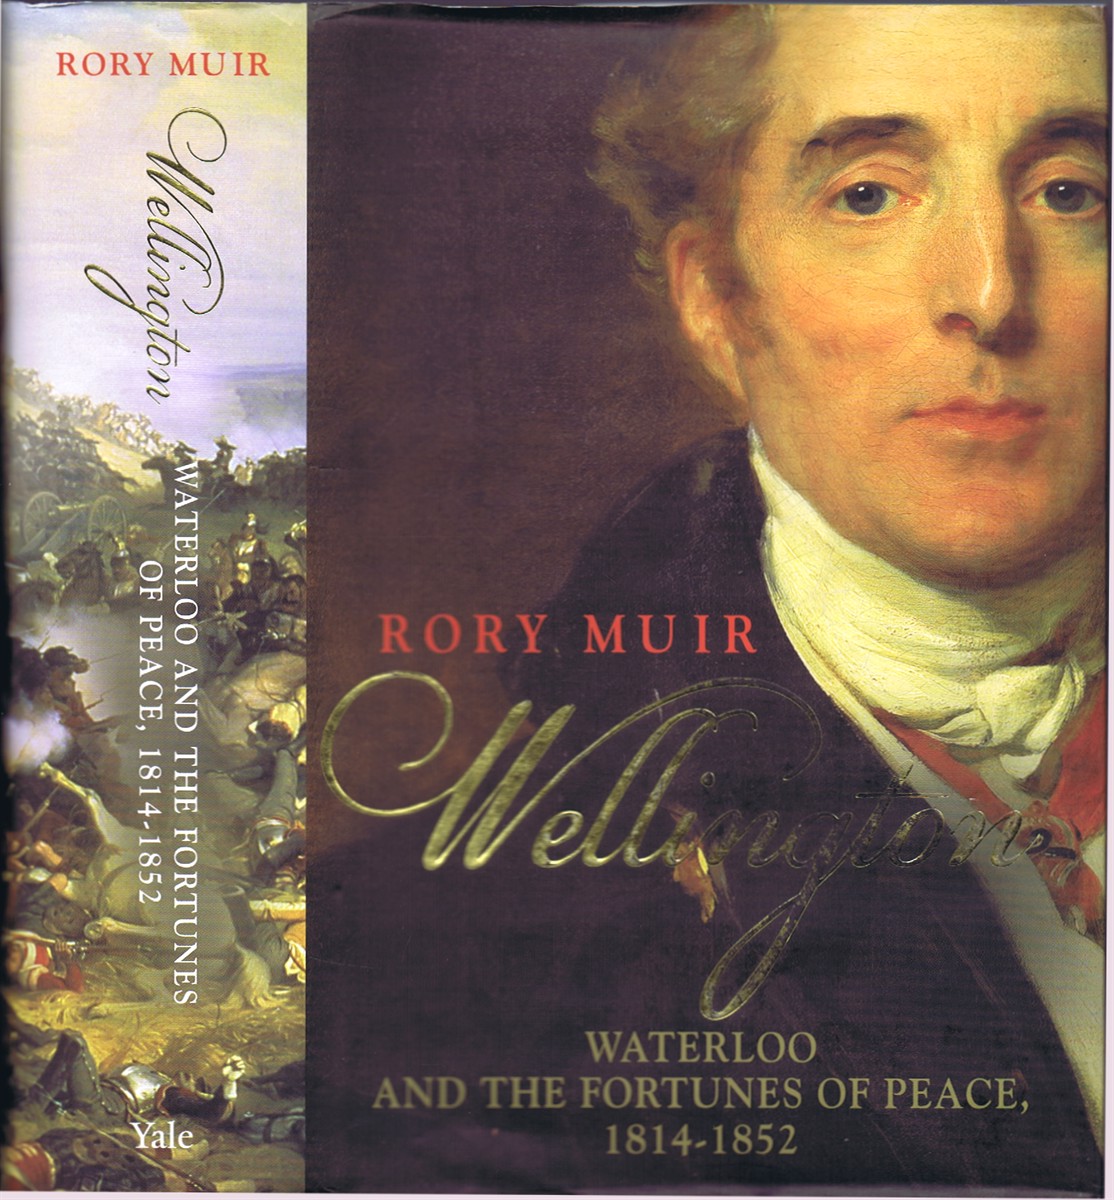 MUIR, RORY - Wellington: Waterloo and the Fortunes of Peace, 1814-1852 (Volume 2)